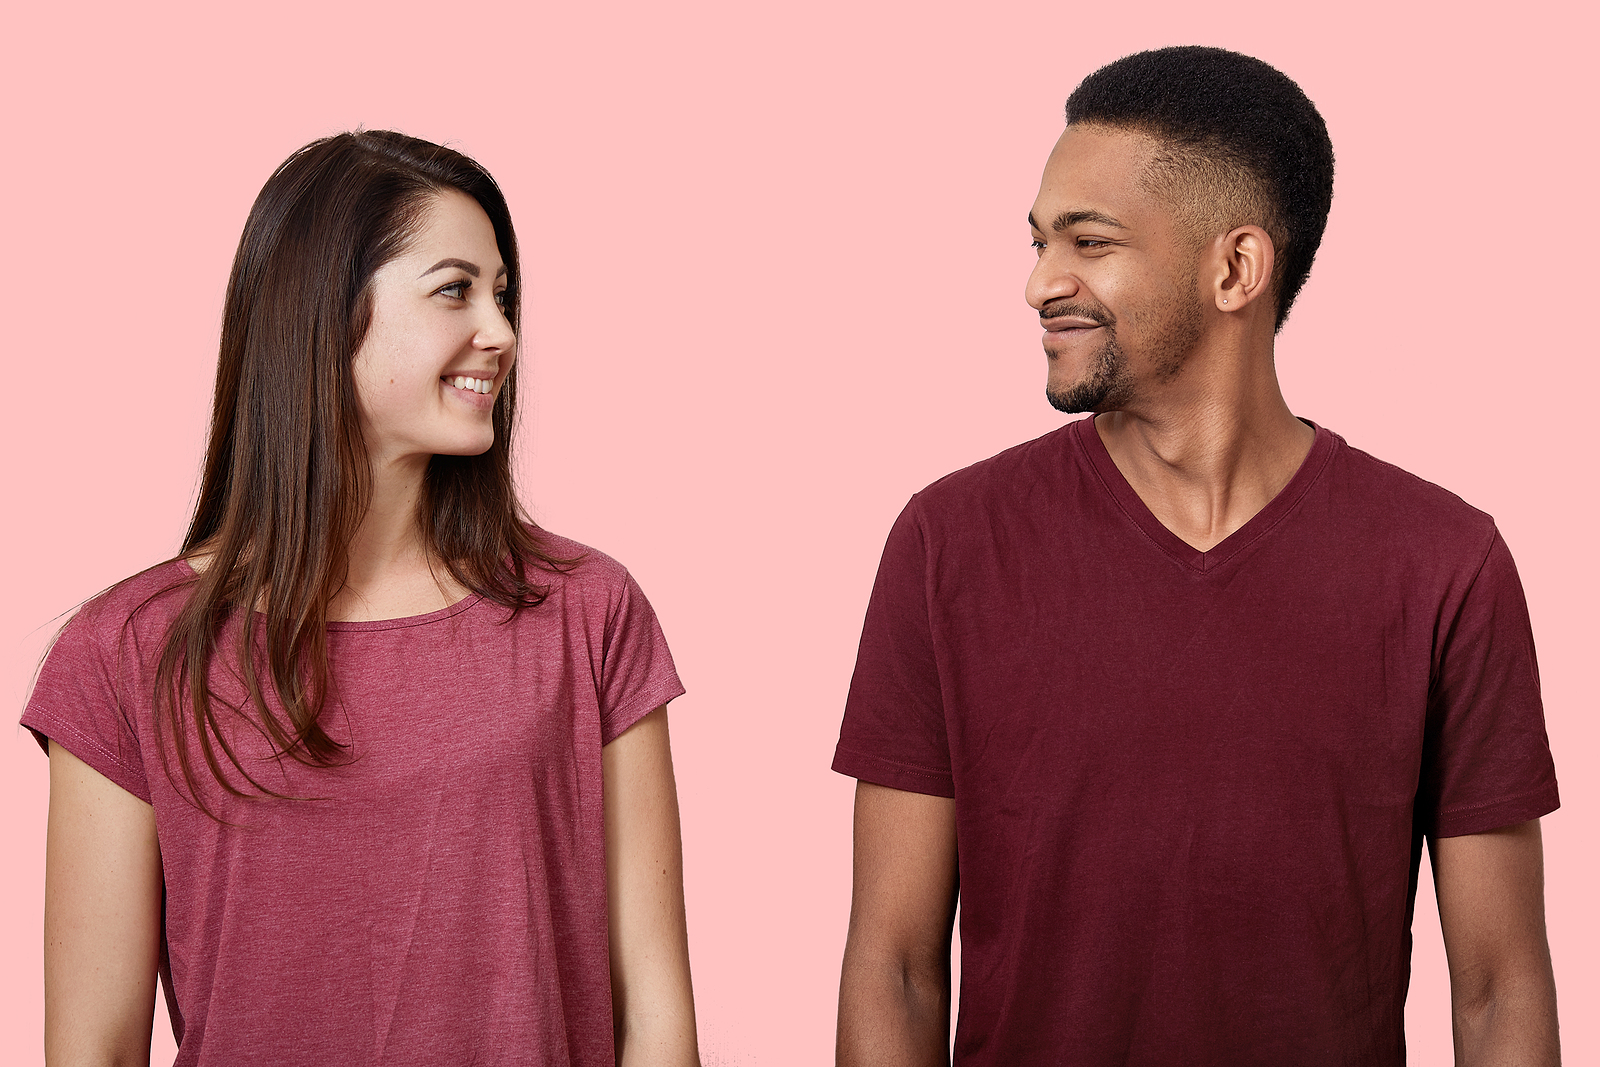 An attractive man and woman smile while standing next to eachother looking at one another against a pink background.